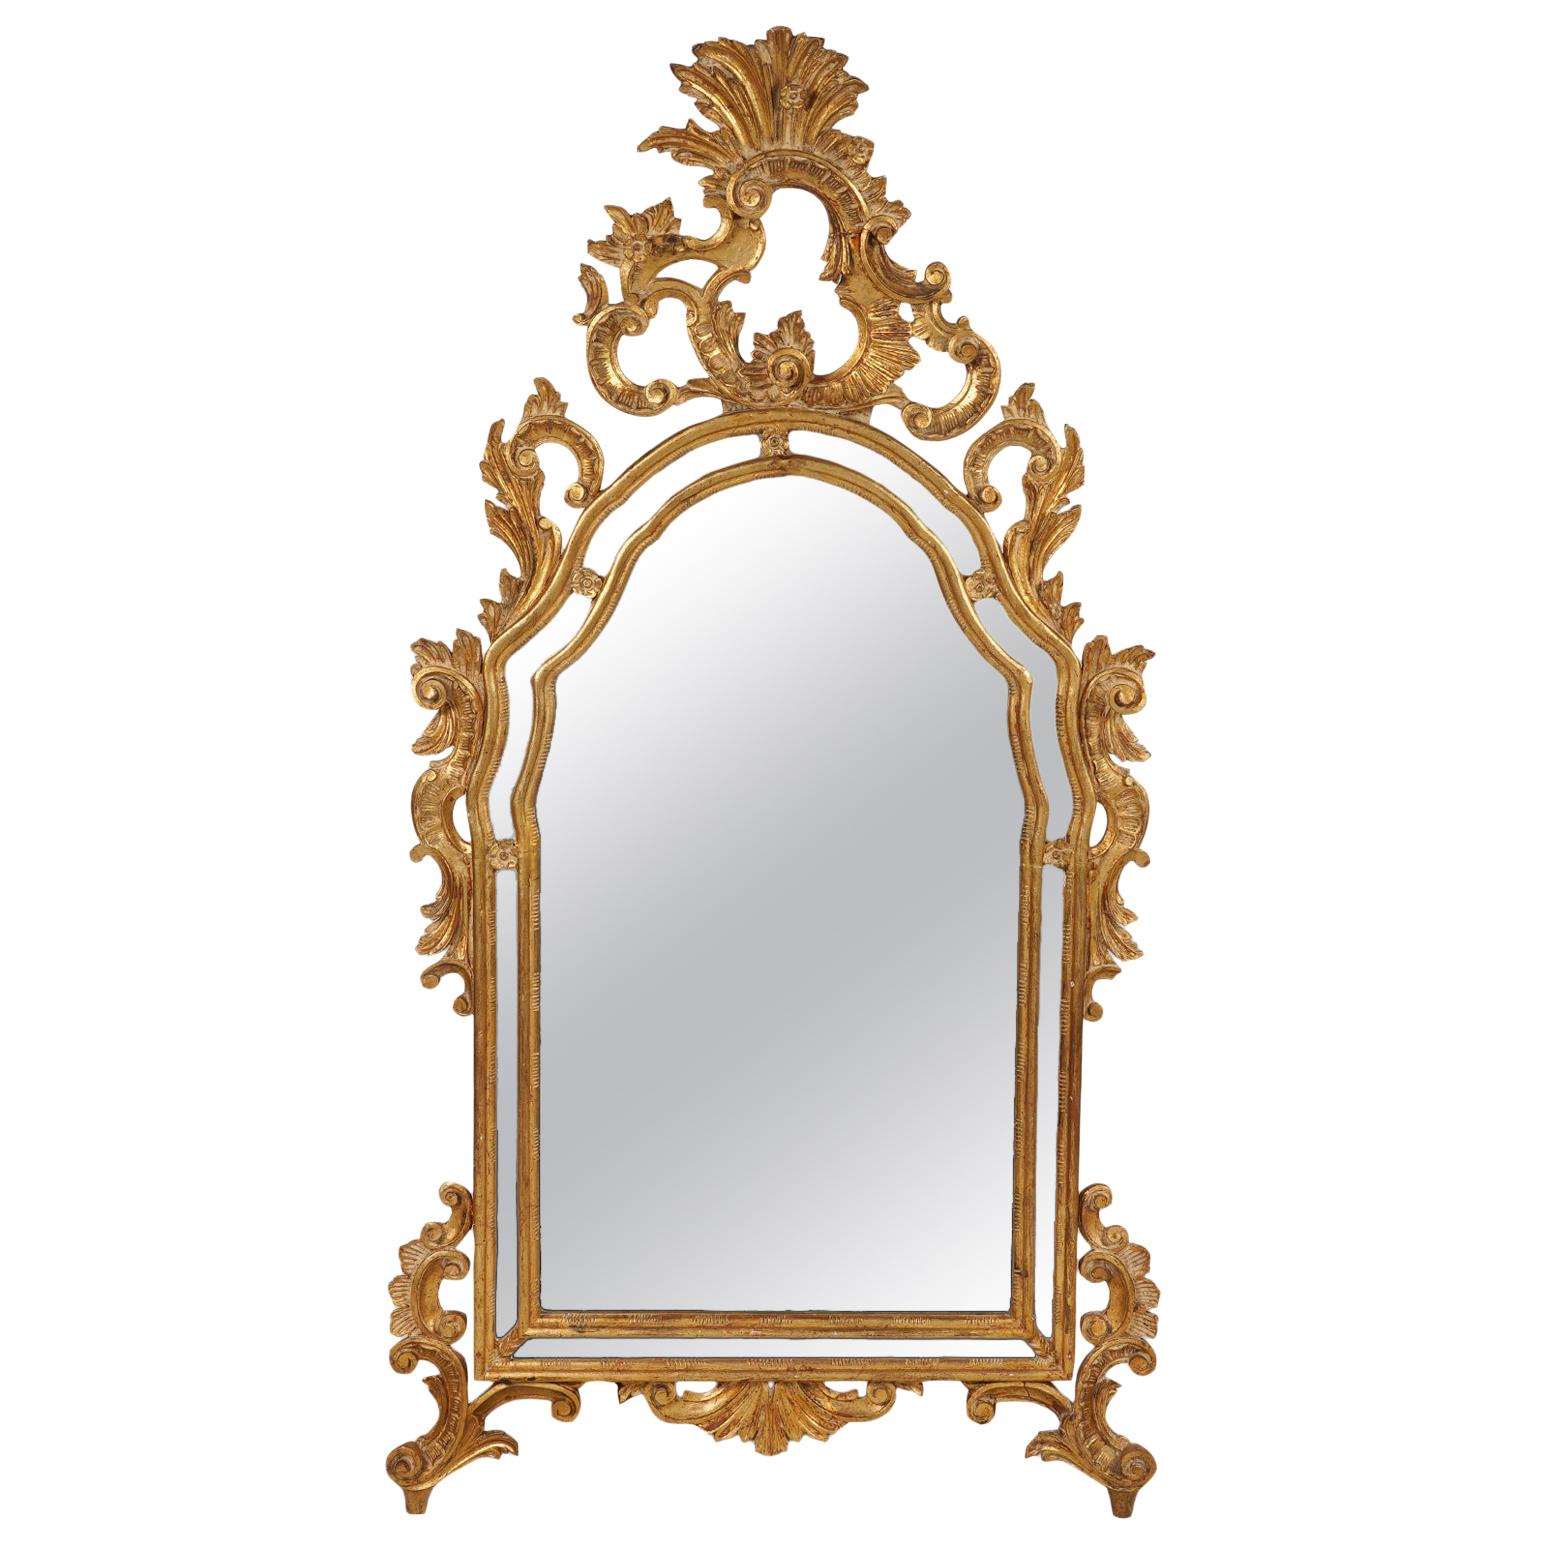 Italian Rococo Style Carved Giltwood Mirror with Mirrored Panels, circa 1940